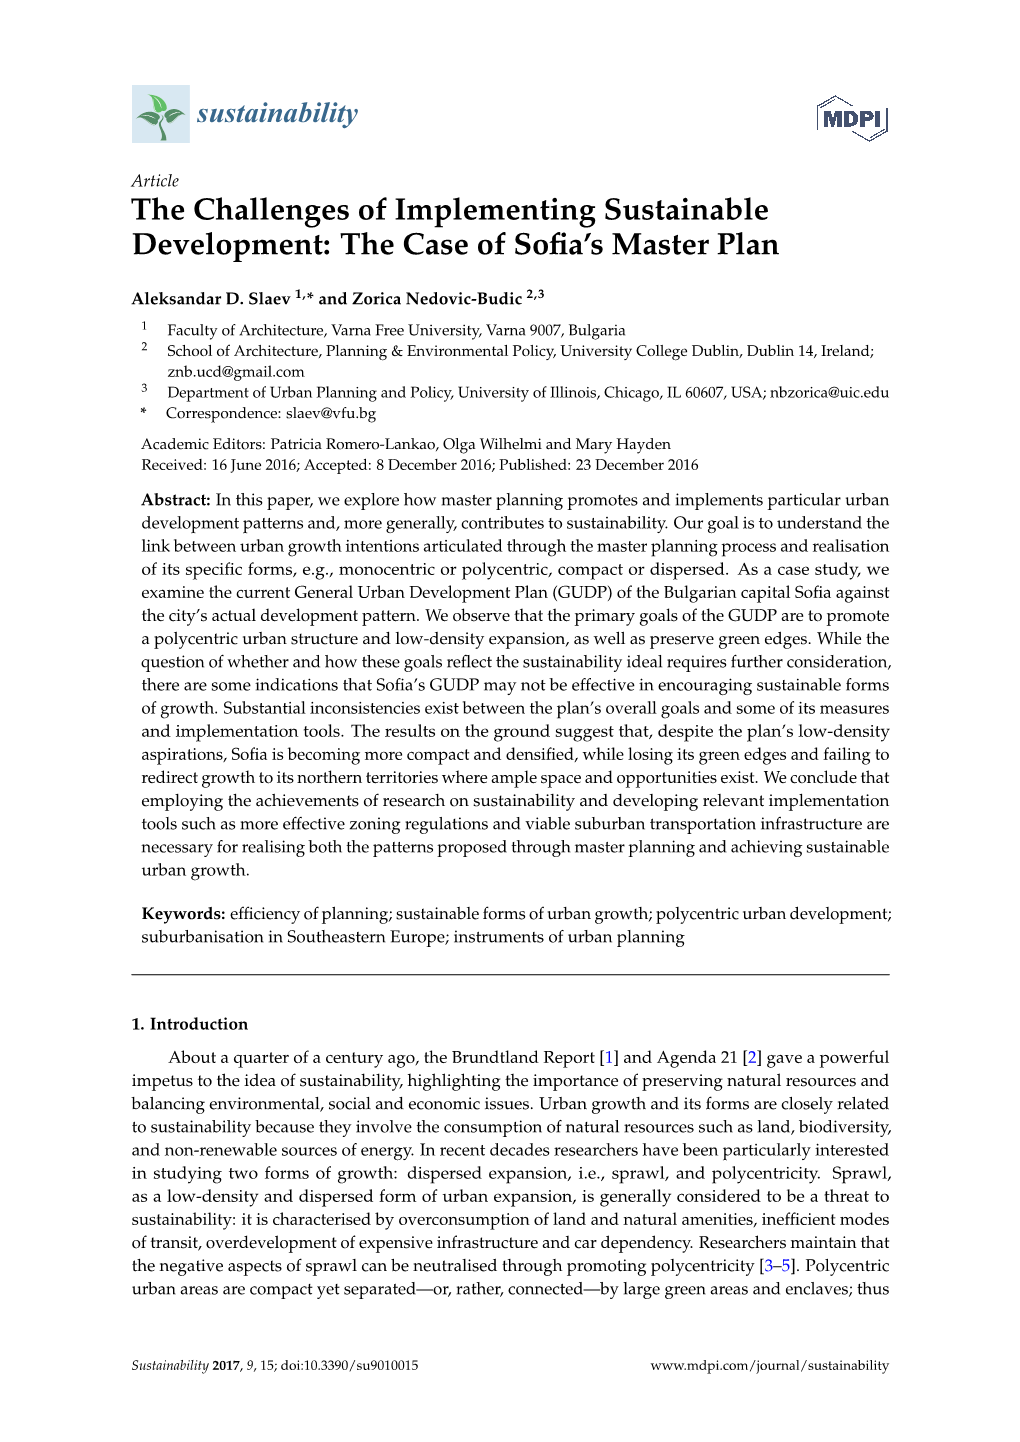 The Challenges of Implementing Sustainable Development: the Case of Soﬁa’S Master Plan